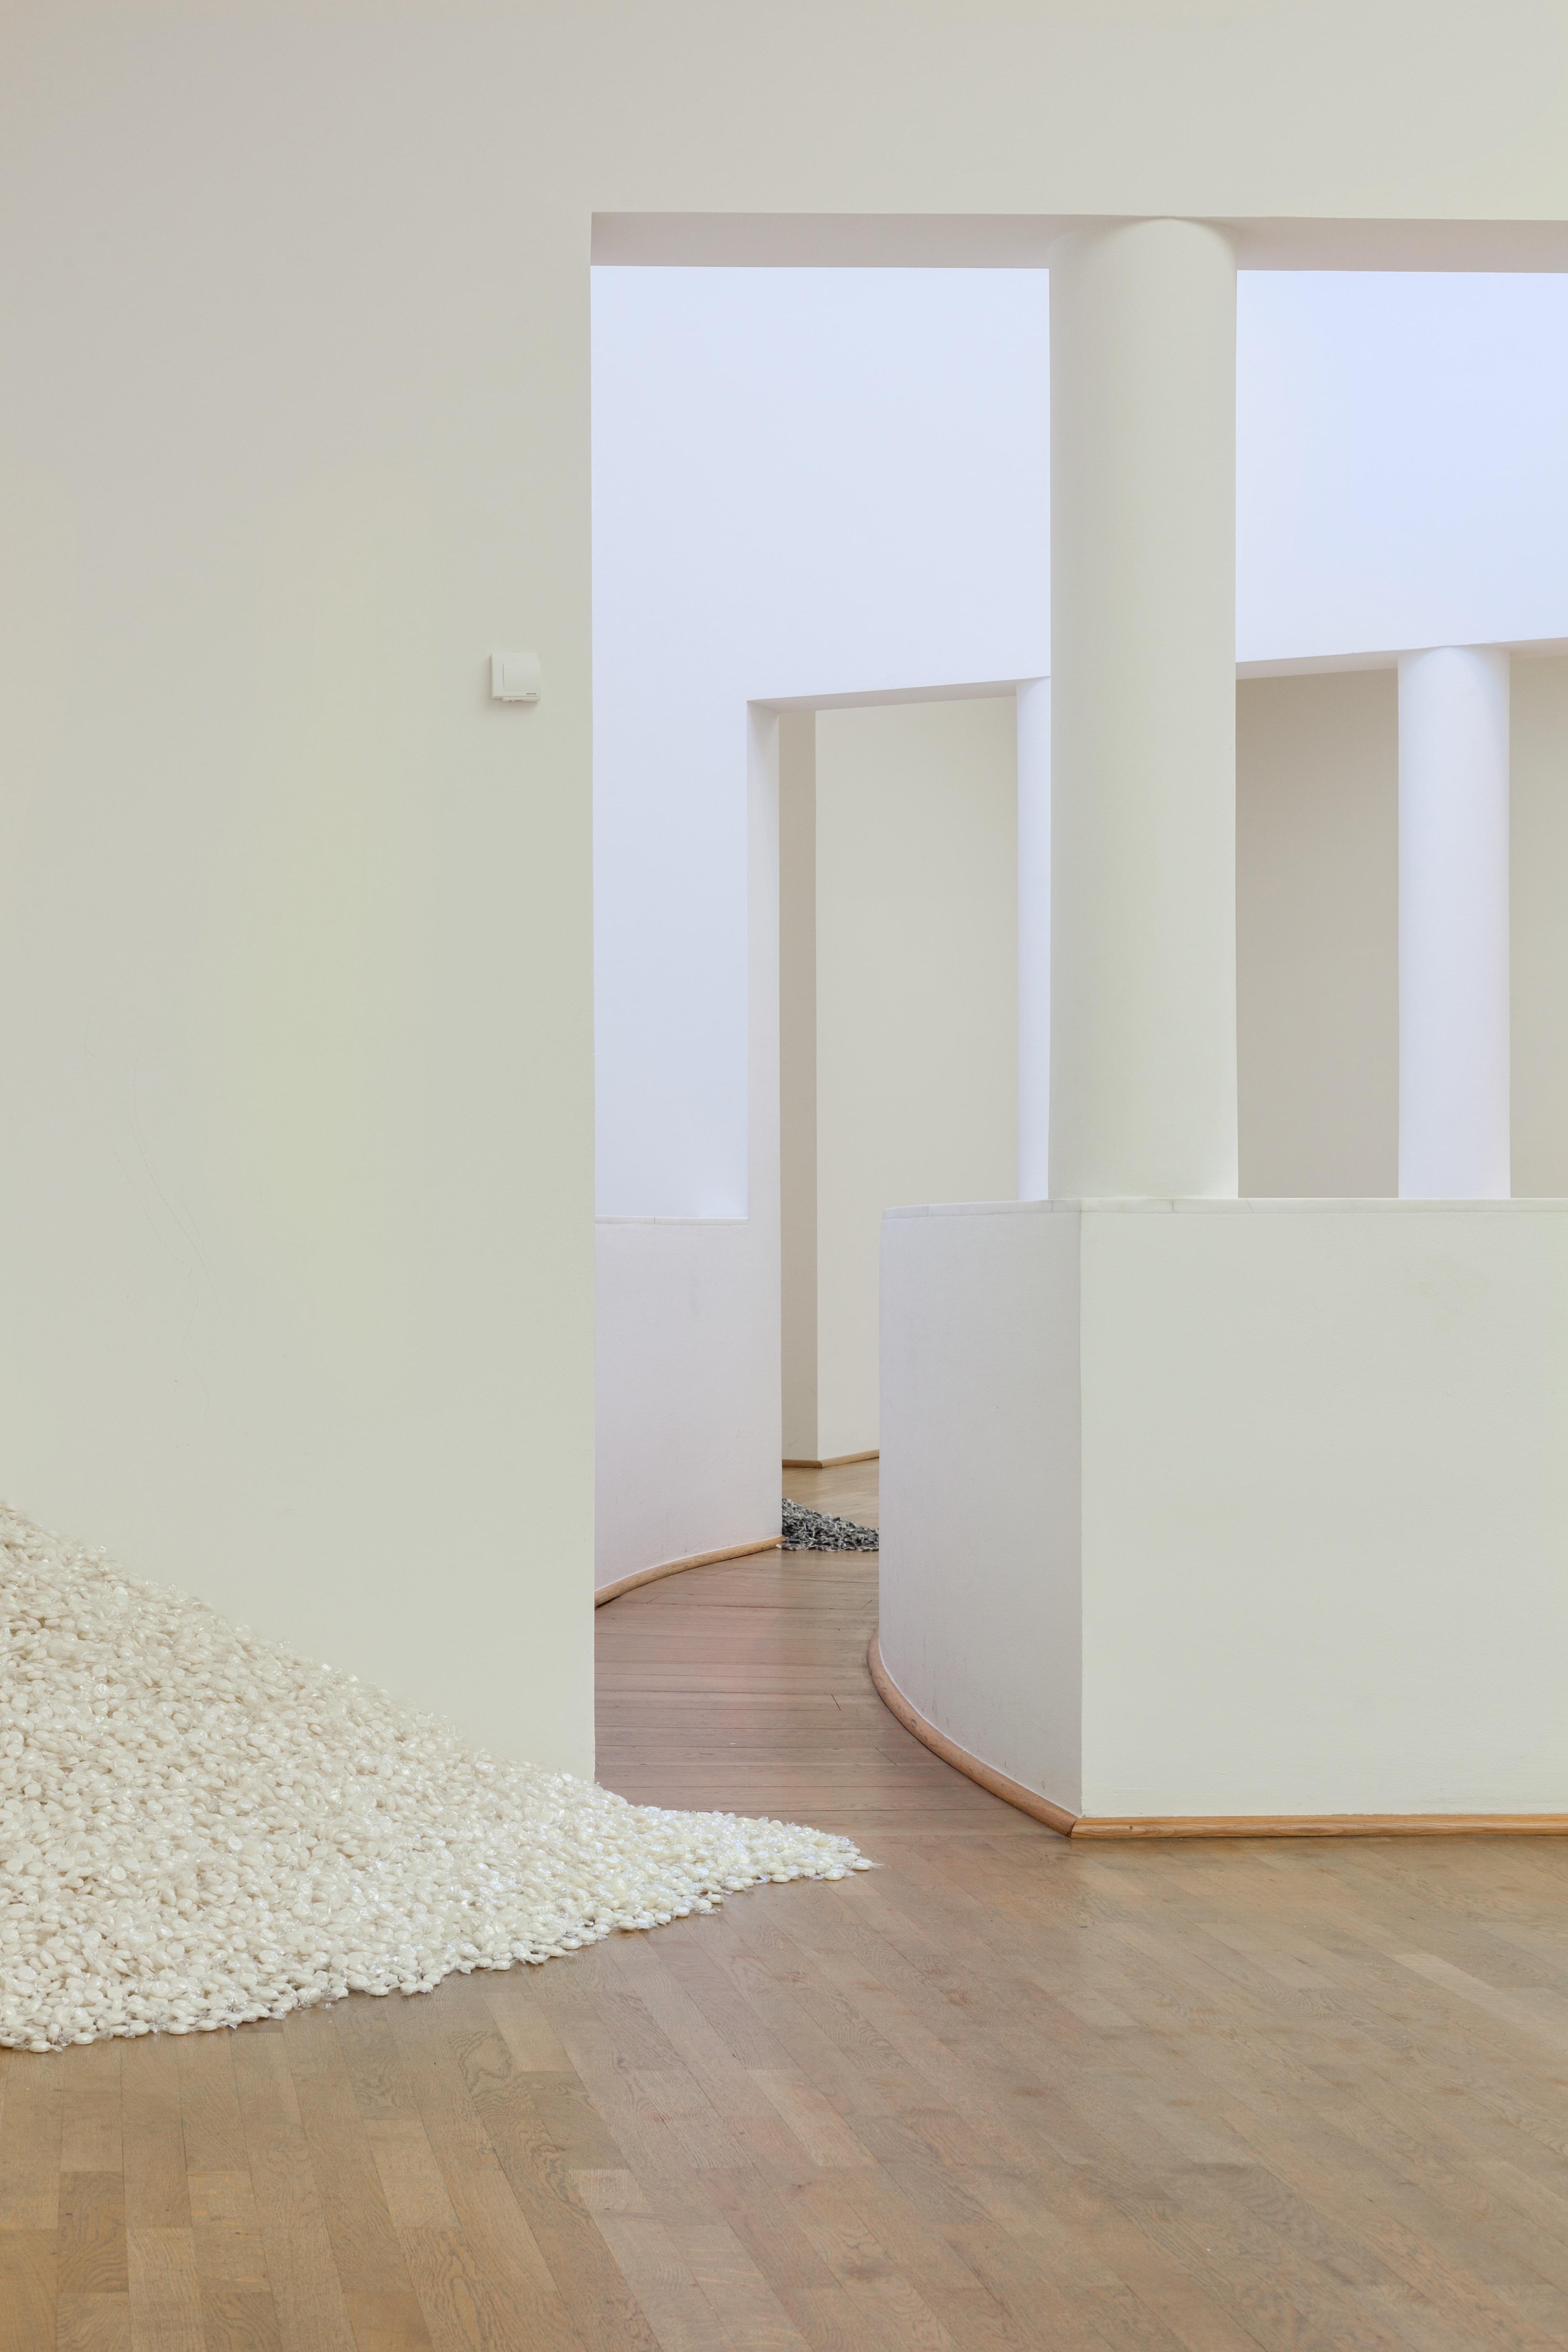 A gallery space with views into three somewhat empty rooms. On the floor of the first room is a large pile of white candy.